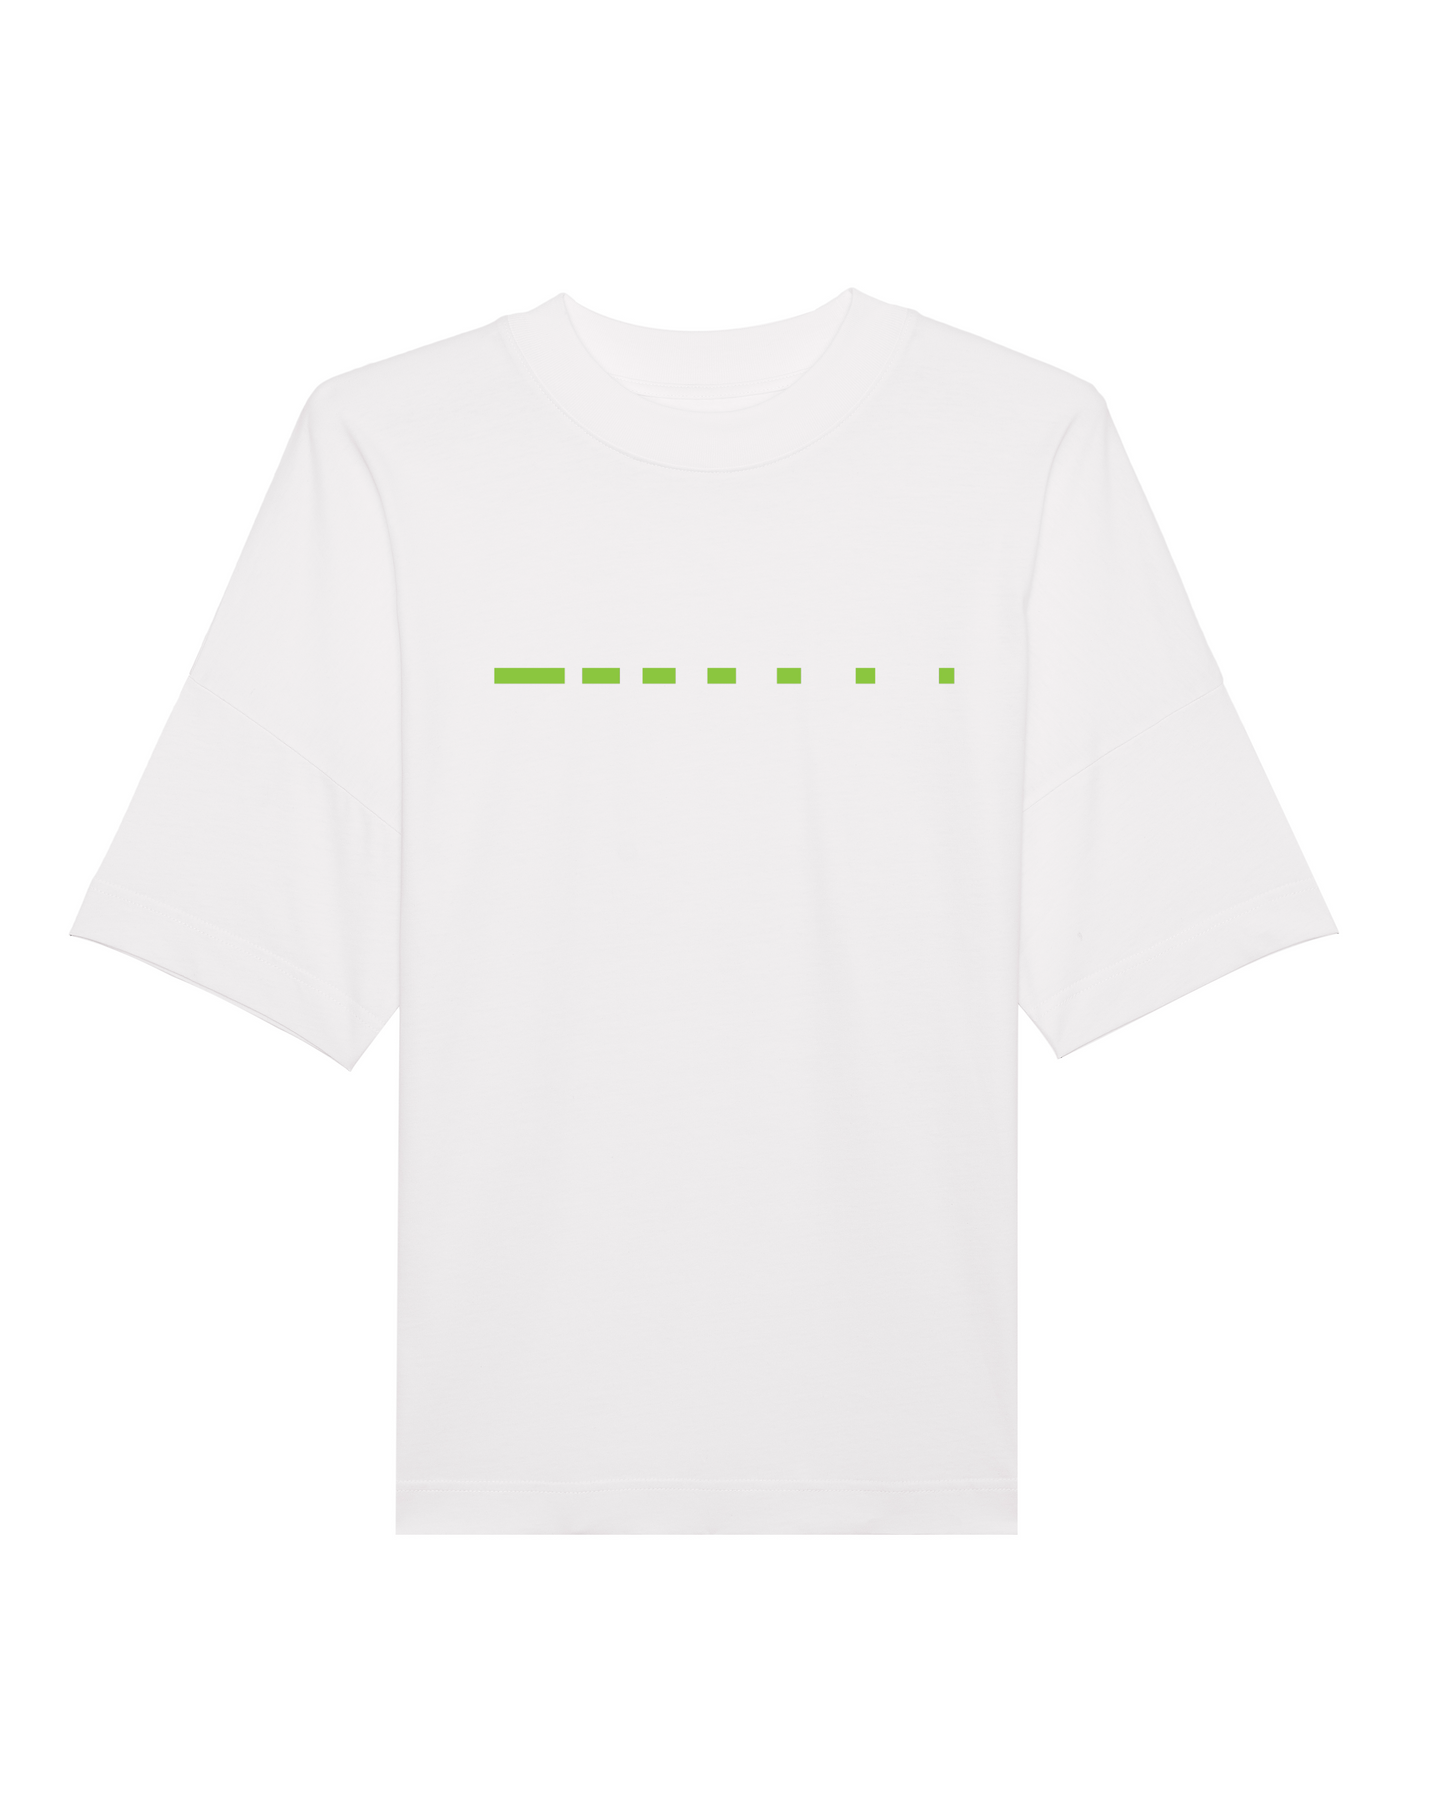 Green Iconic Elements T-shirt [White]